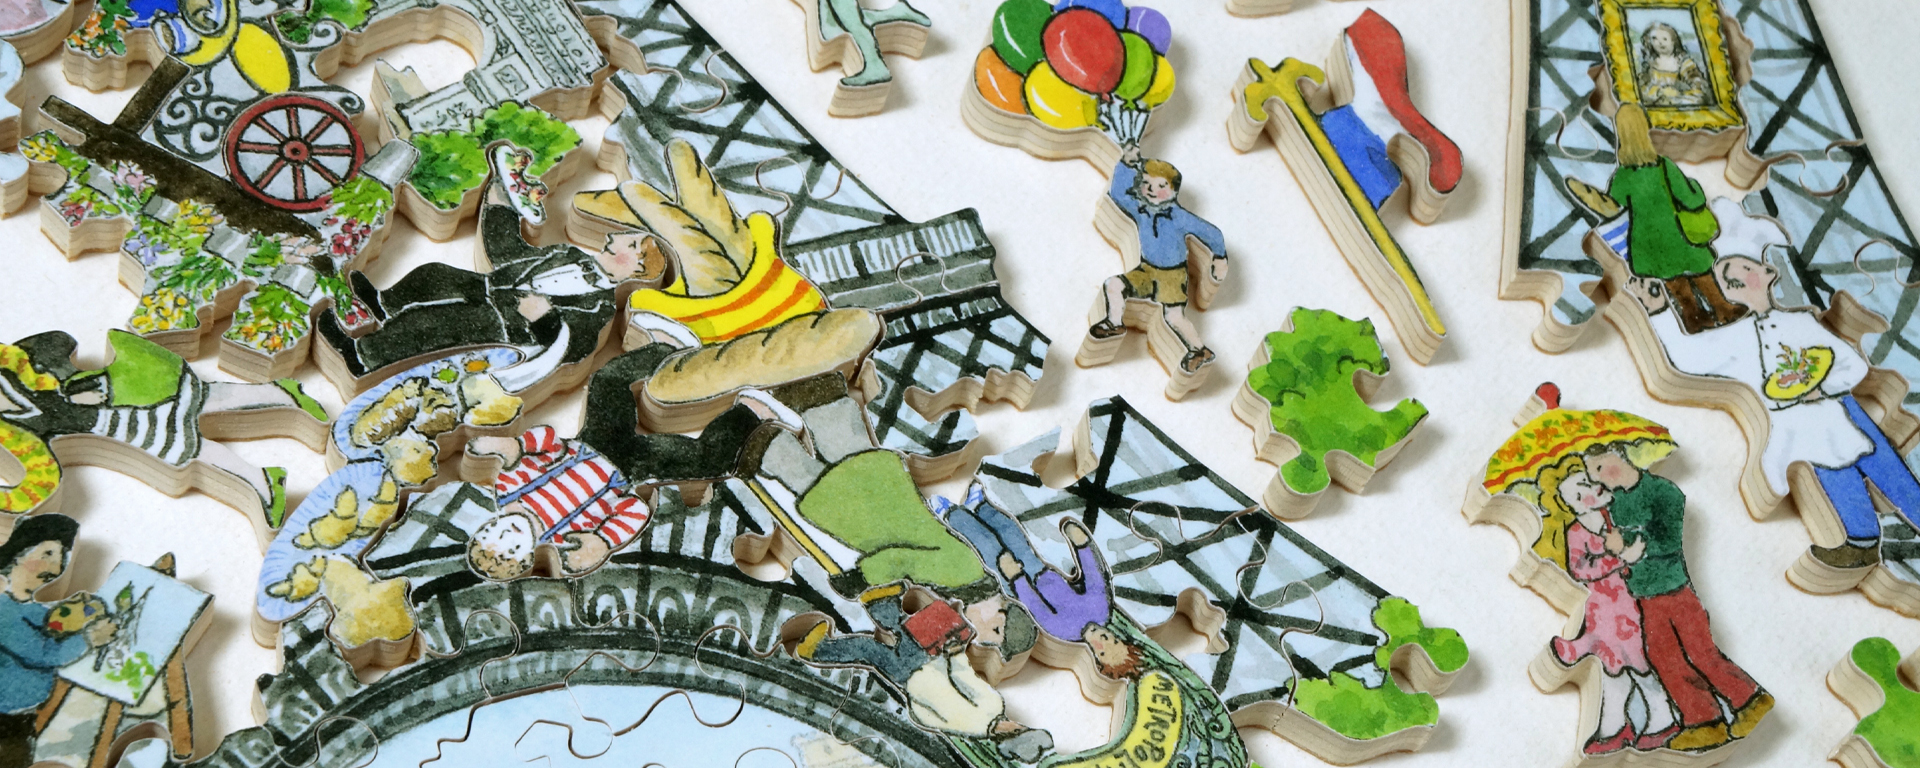 Wooden Paris puzzle featuring the Eiffel Tower and pieces cut out in the shape of people doing a variety of activities.